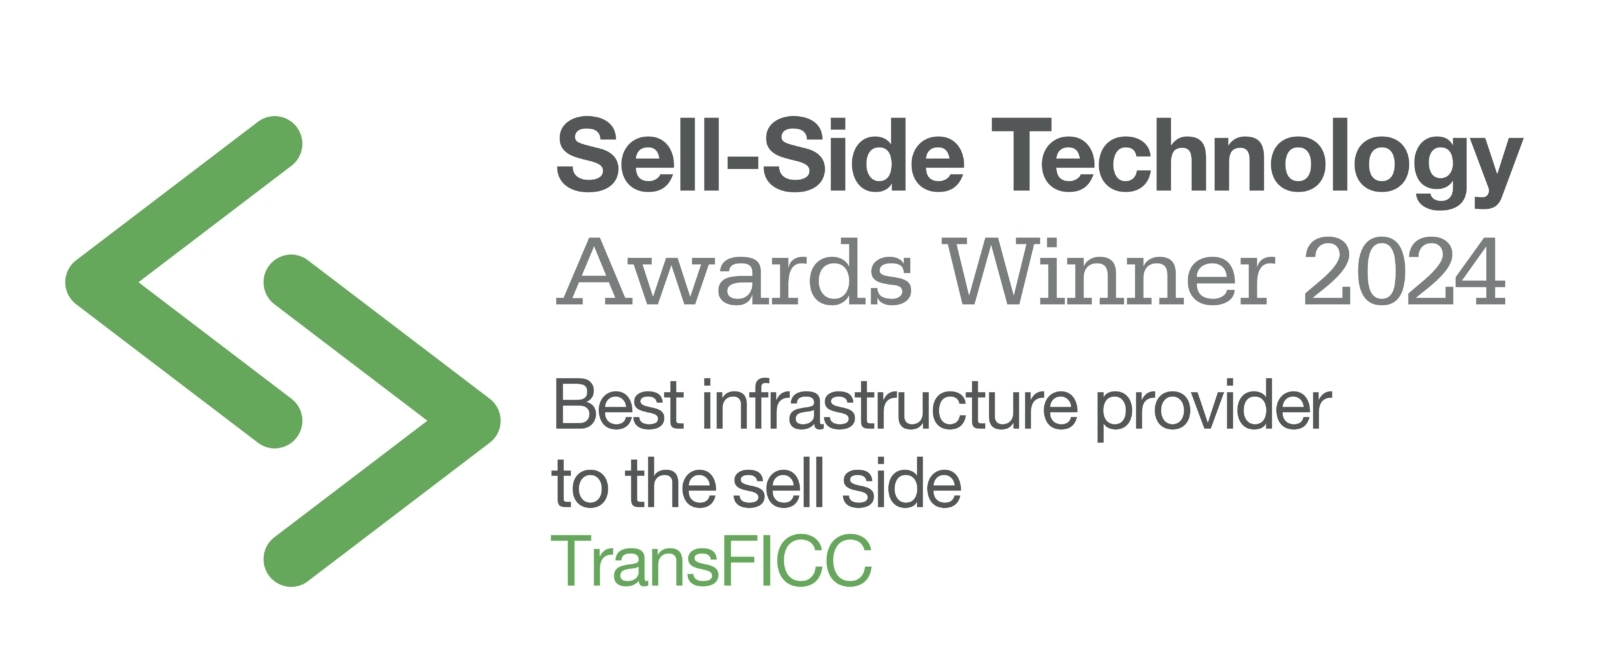 TransFICC Named Best Infrastructure Provider to the Sell-Side for 2024